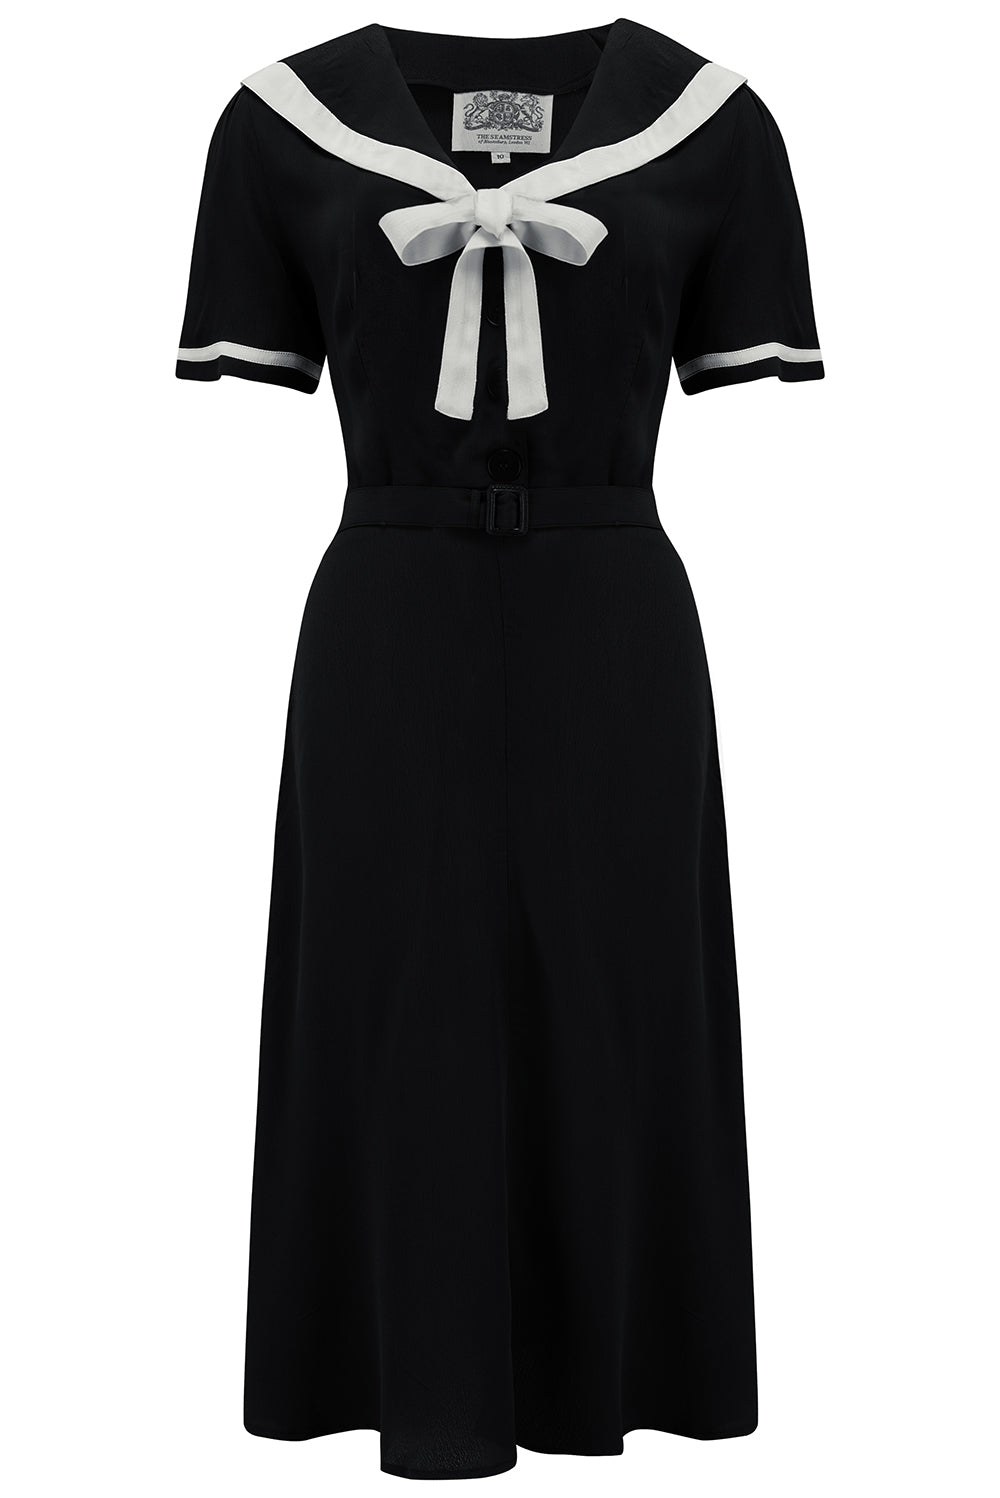 Patti Dress In 1940s Solid Black With Contrast Collar, Authentic true vintage style - CC41, Goodwood Revival, Twinwood Festival, Viva Las Vegas Rockabilly Weekend Rock n Romance The Seamstress Of Bloomsbury